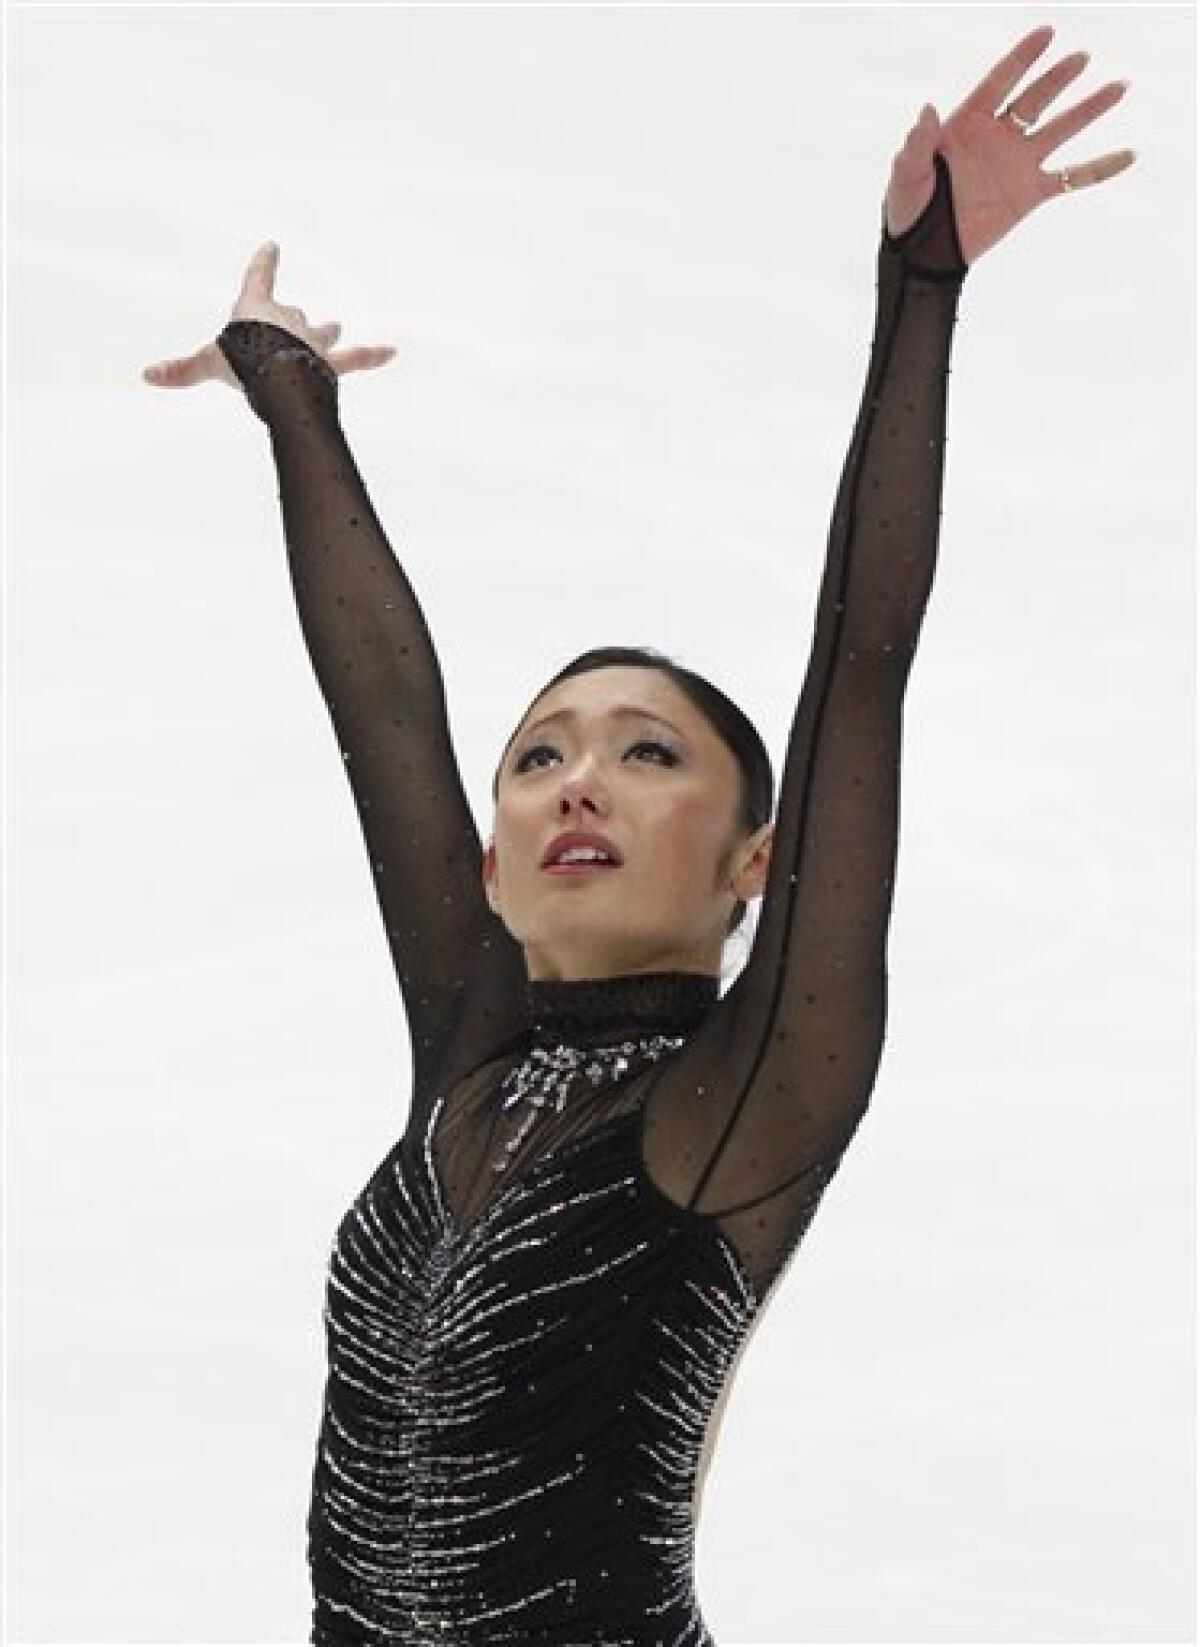 Japan's Miki Ando performs her free program at the ISU Figure Skating World championships in Moscow, Russia, Saturday, April 30, 2011. (AP Photo/Misha Japaridze)